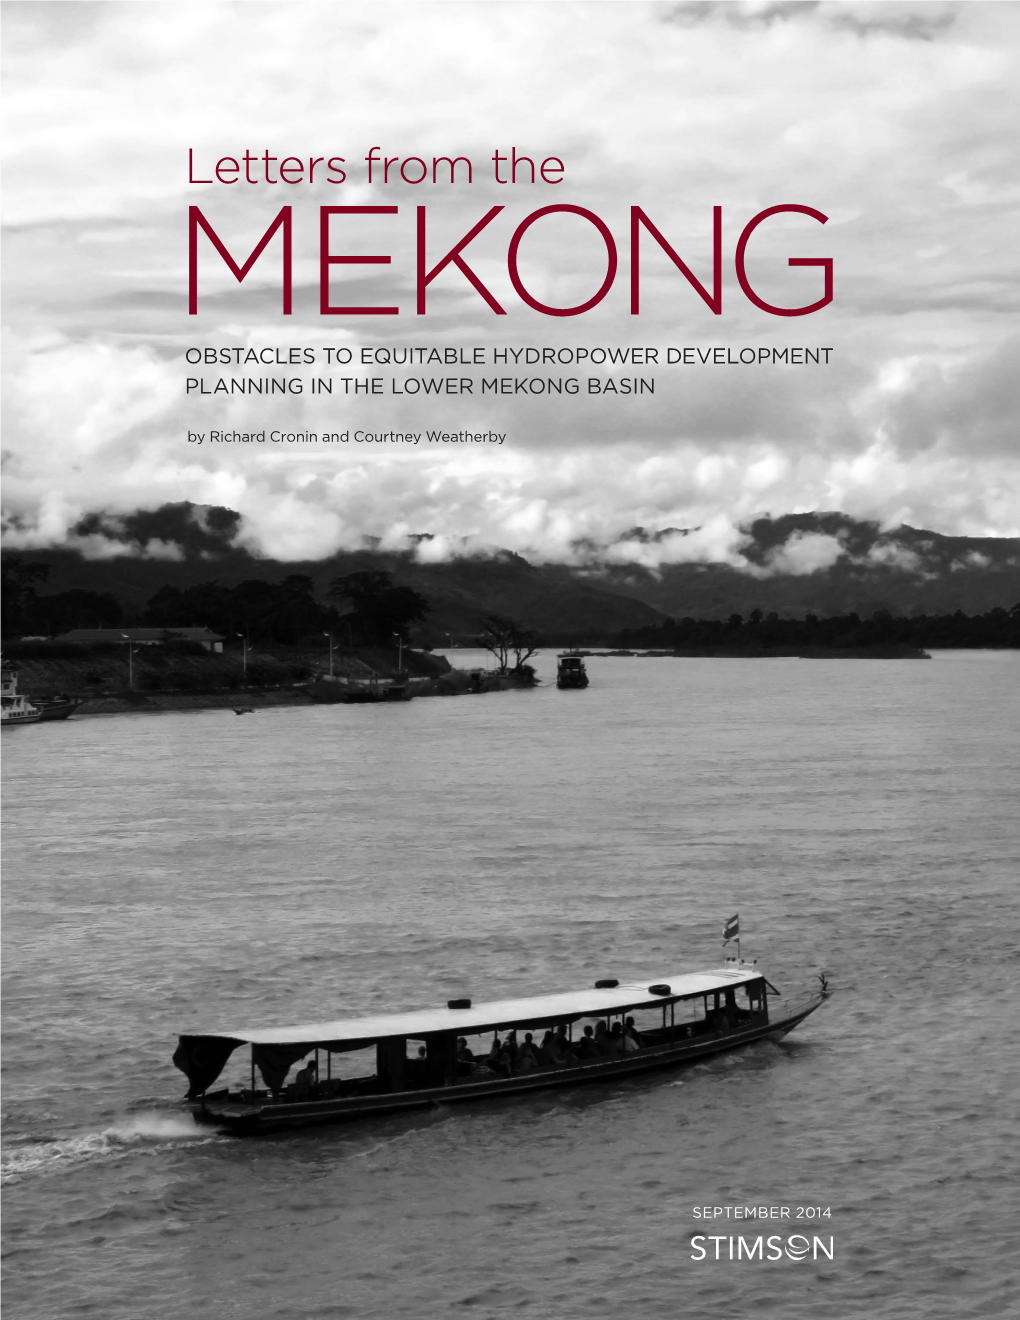 Letters from the MEKONG OBSTACLES to EQUITABLE HYDROPOWER DEVELOPMENT PLANNING in the LOWER MEKONG BASIN